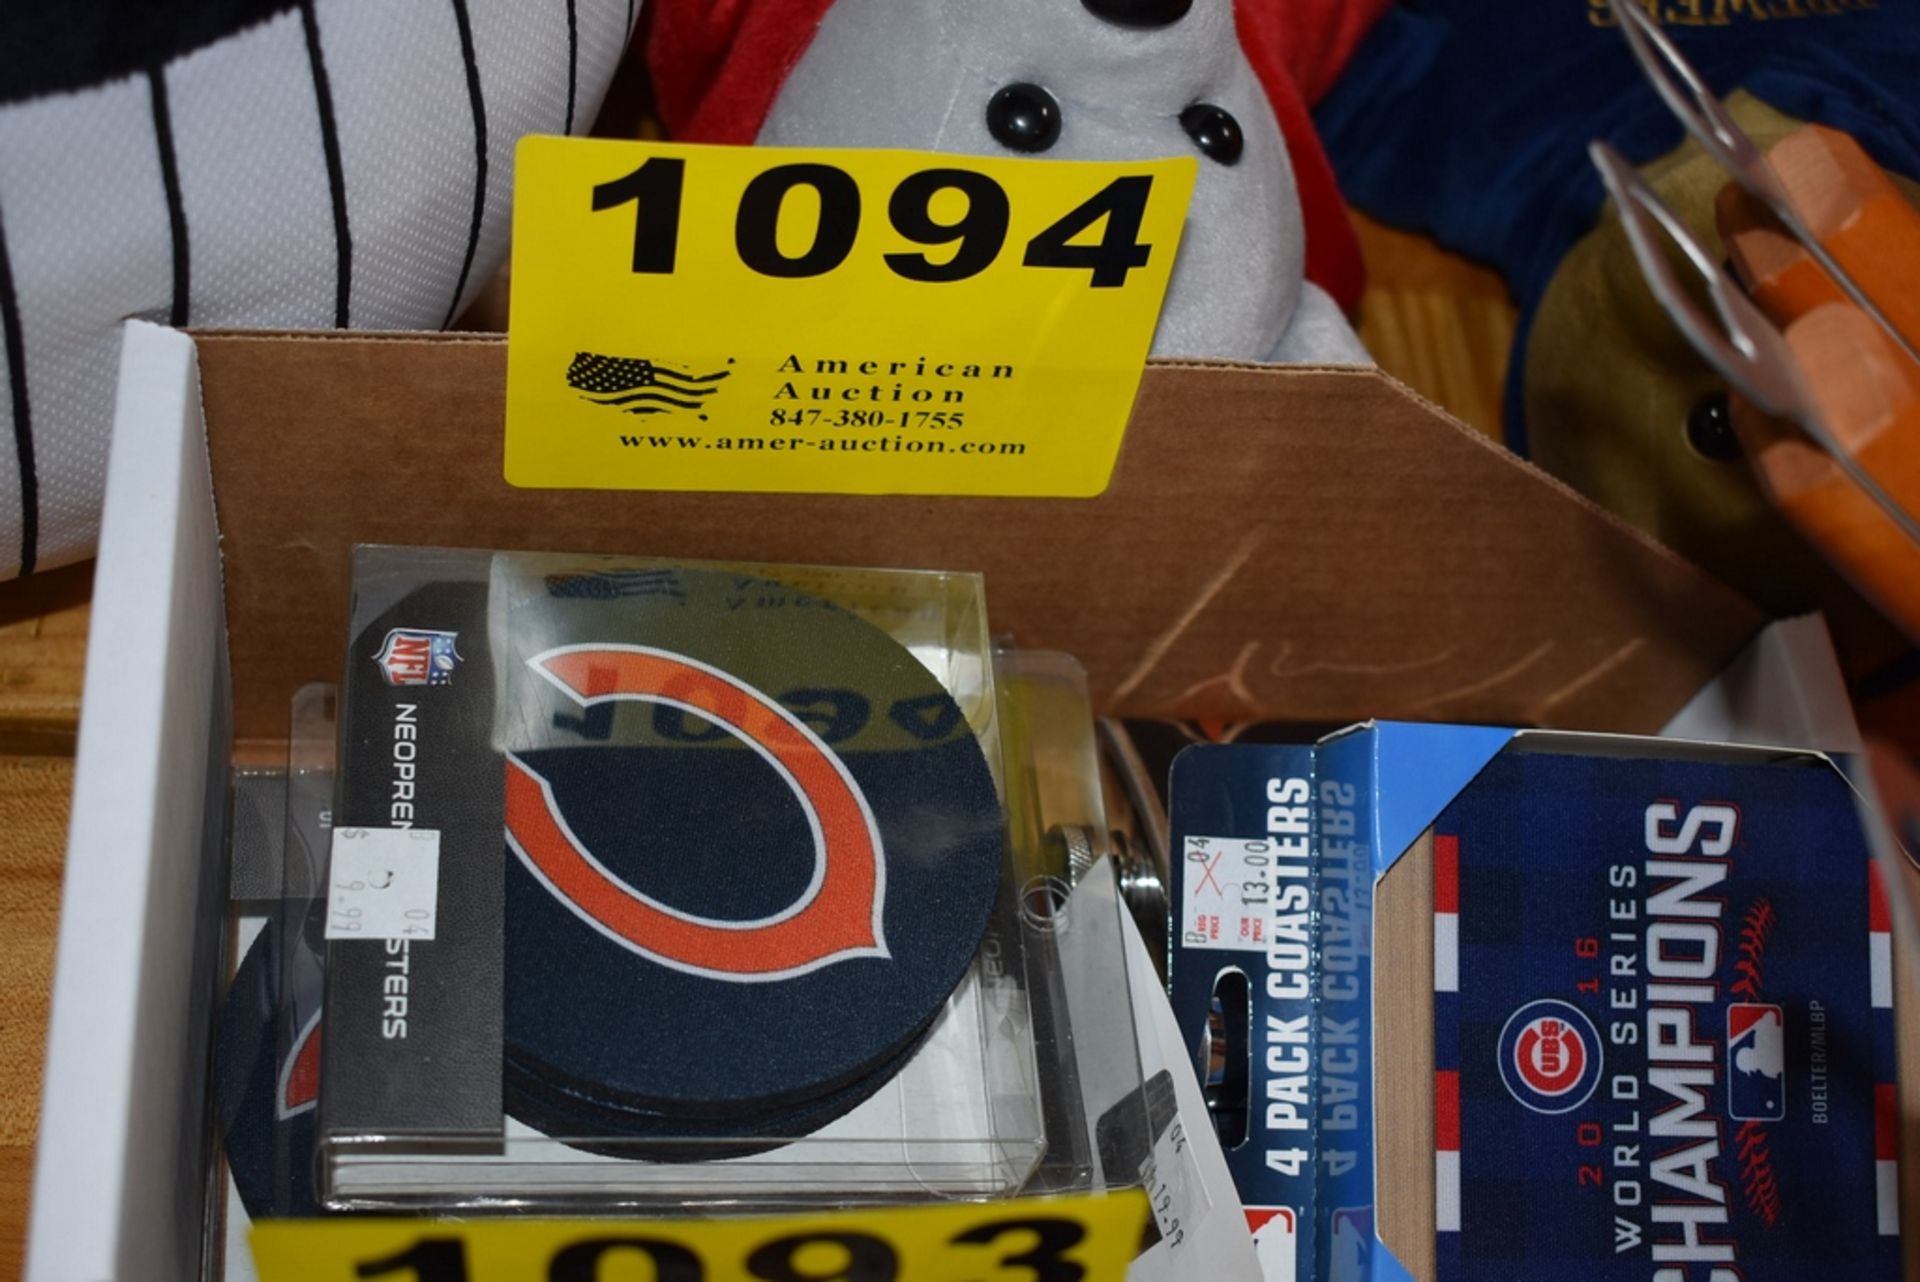 CHICAGO BEARS AND CUBS COASTERS AND (2) CHICAGO BEARS FLASKS